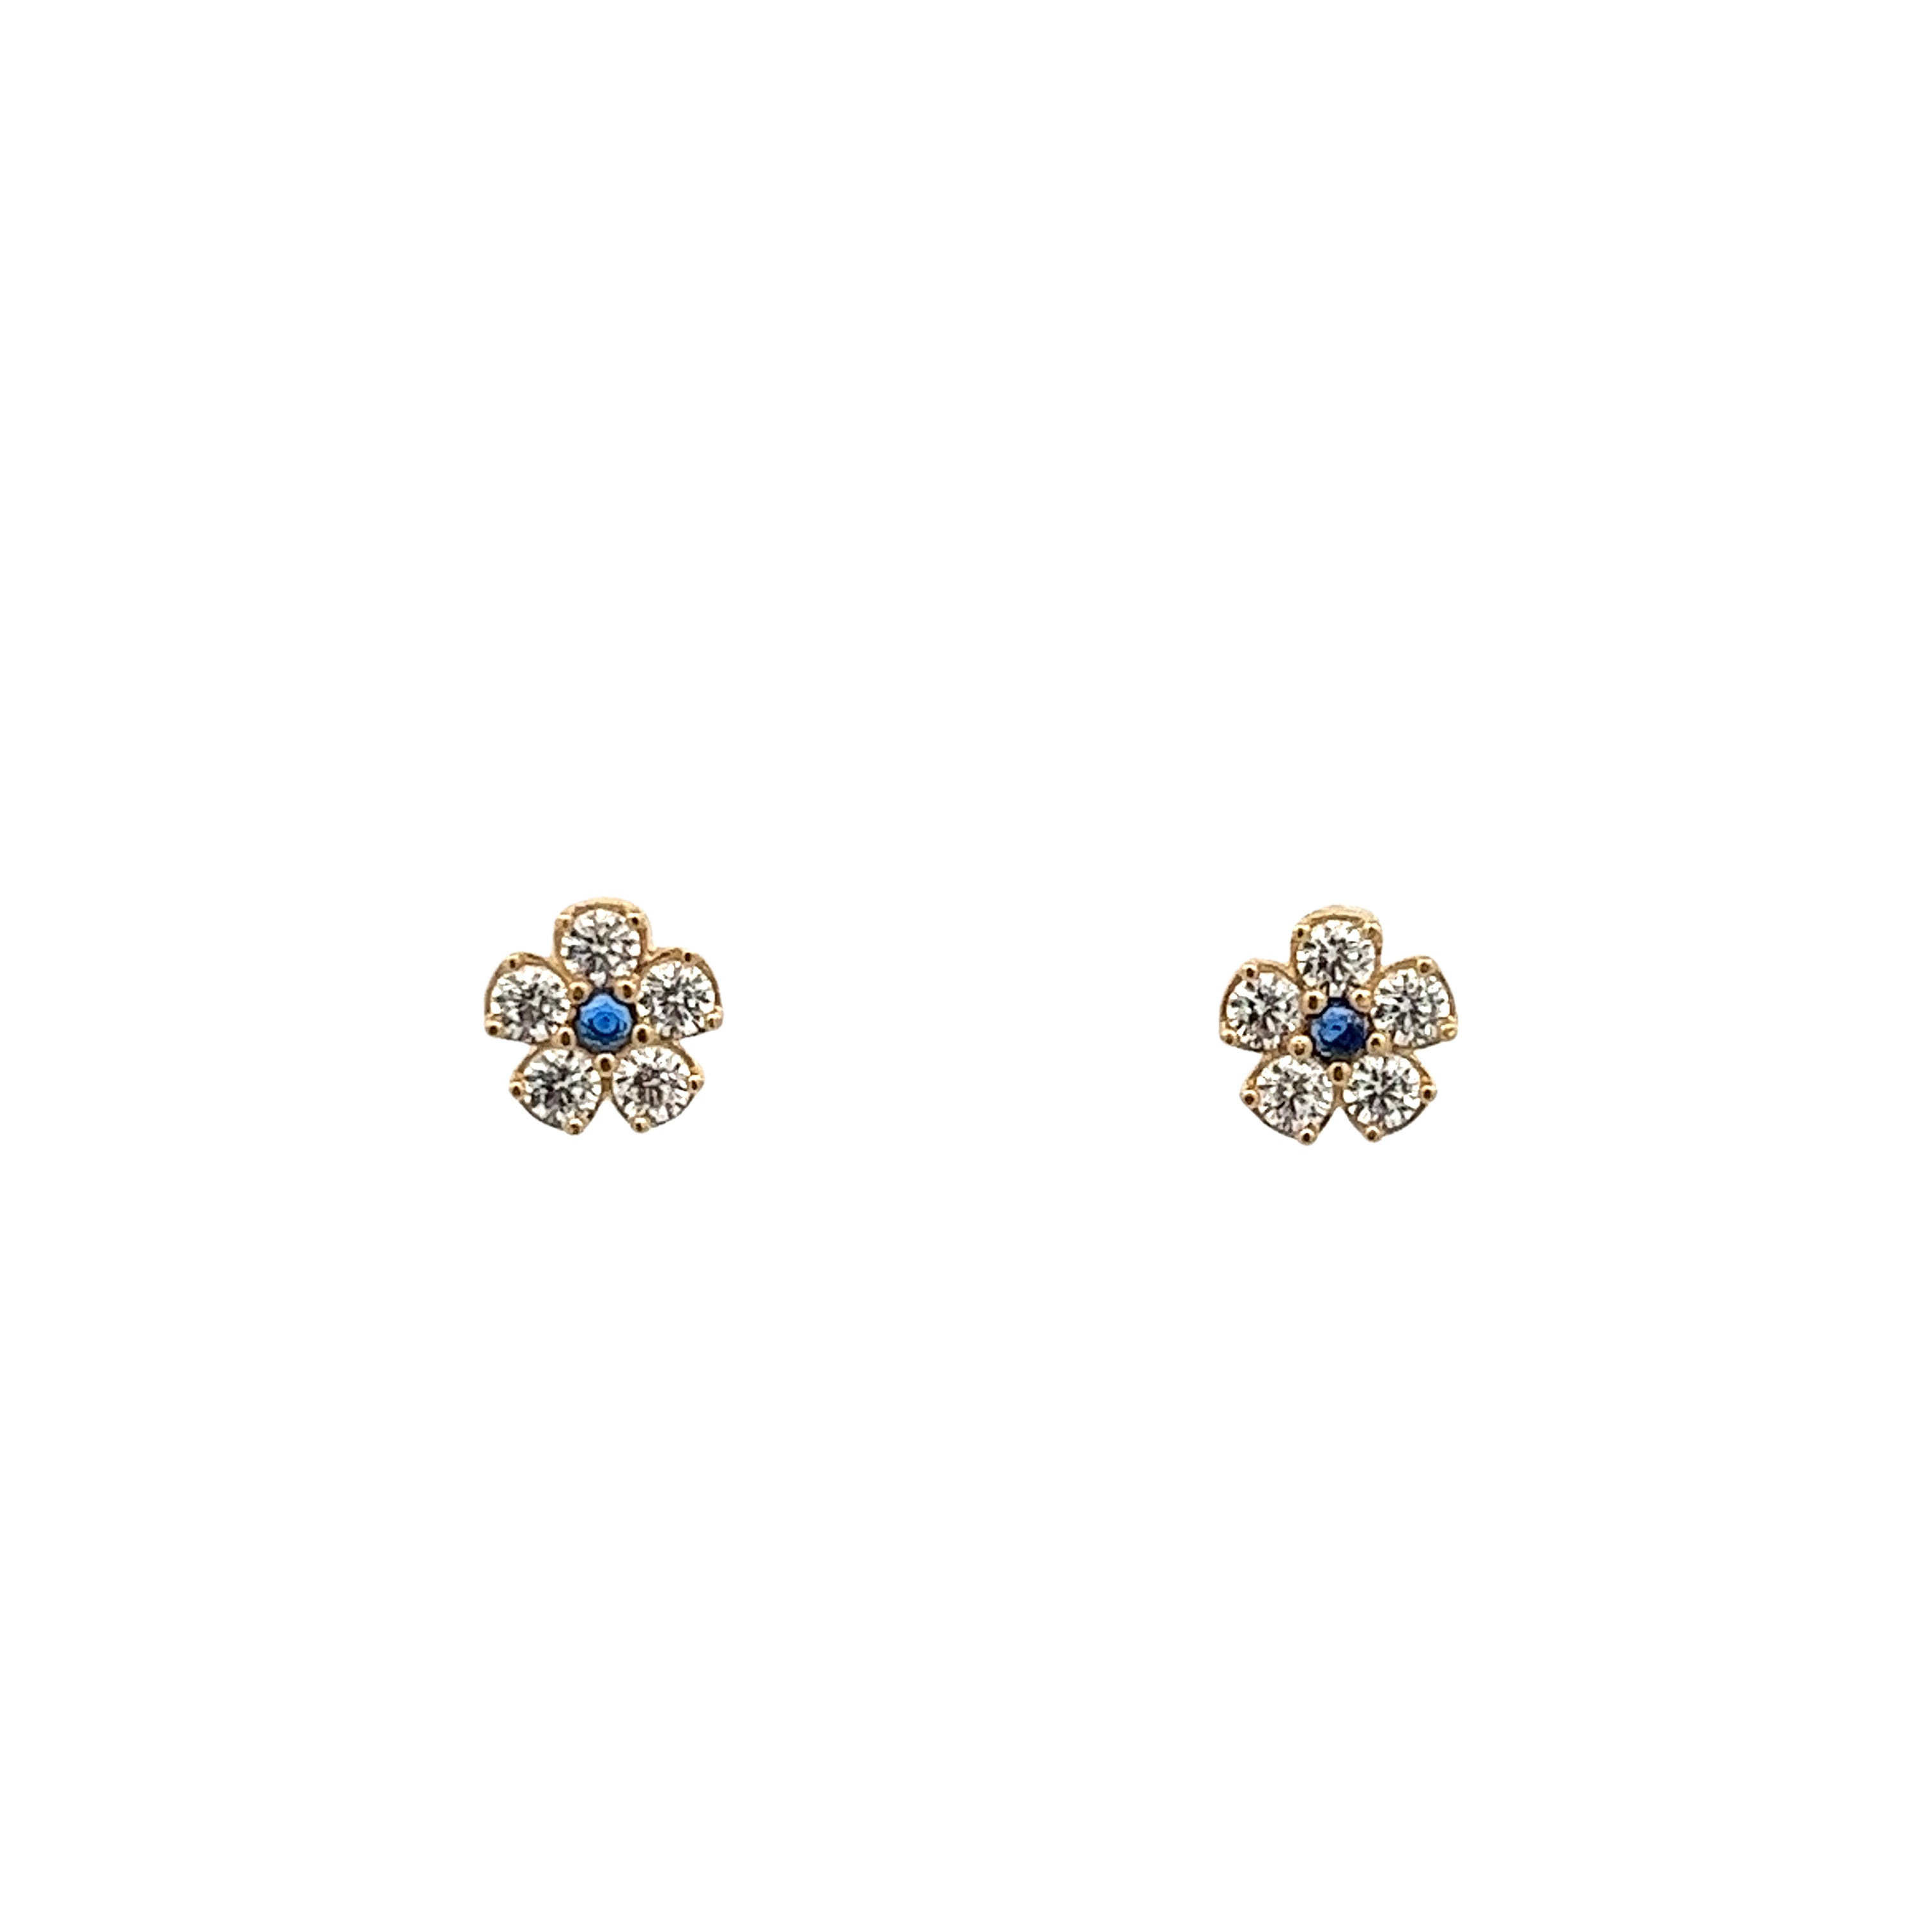 14K GOLD FLOWER WITH BLUE CRYSTALS EARRINGS